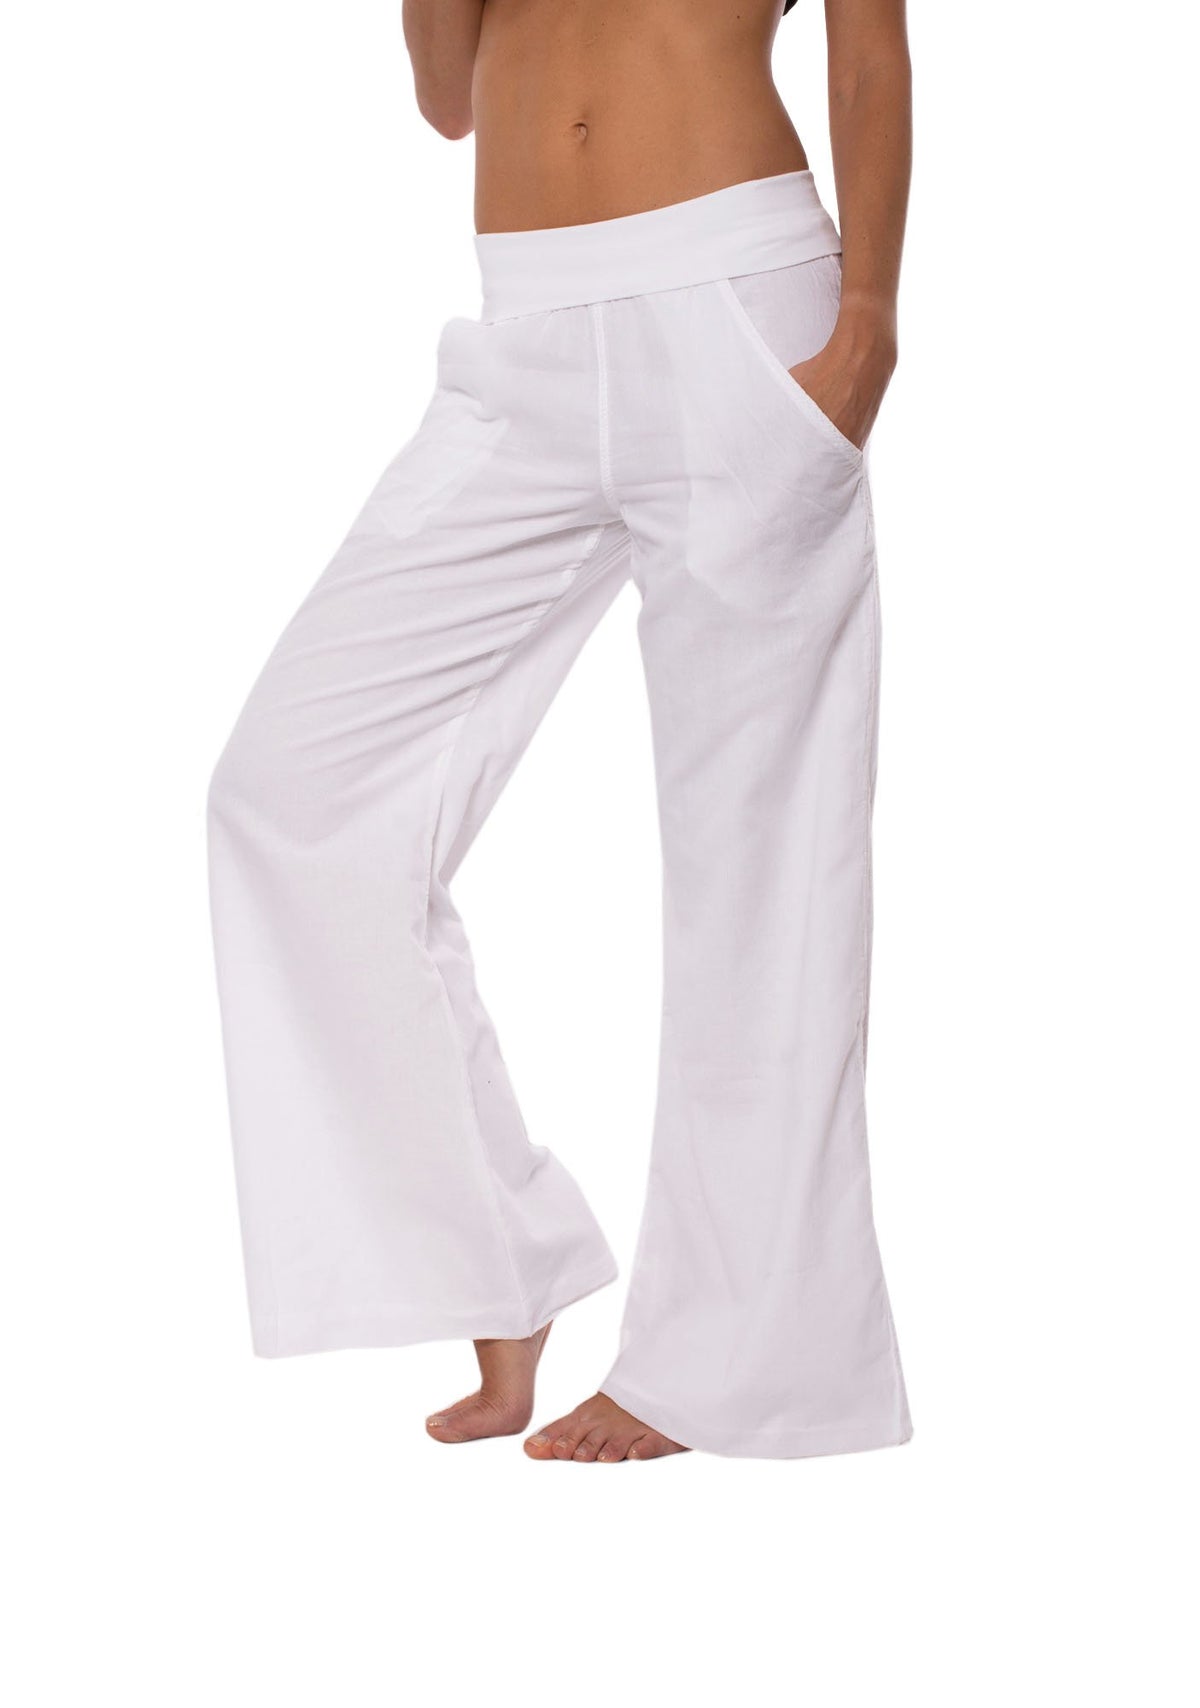 Hard Tail forever - Double Layered Voile Pant (VL-29, White) - Londo Mondo